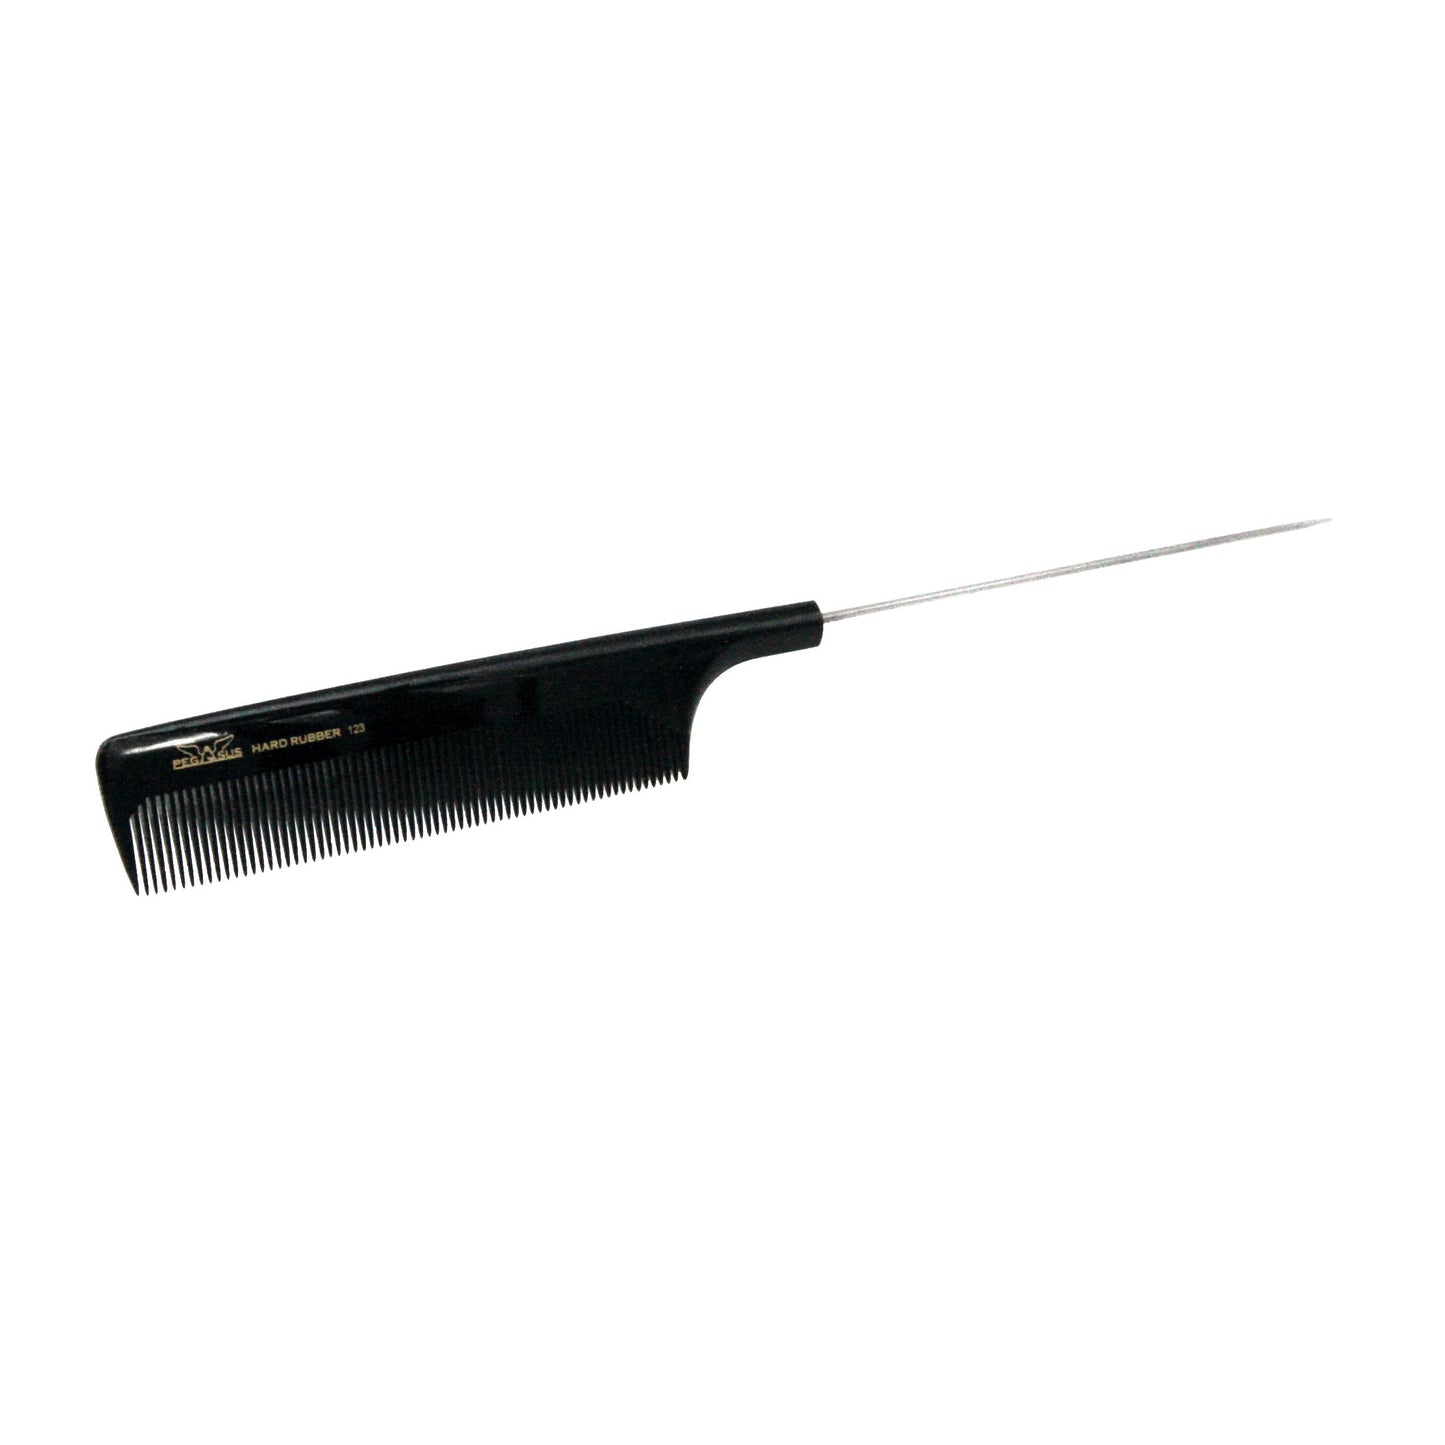 Pegasus 123, 9.75in Hard Rubber Fine Tooth Pintail Comb, Seamless, Anti Static, Heat and Chemically Resistant, Stainless Steel Pin, Great for Parting, Coloring Hair | Peines de goma dura - Black